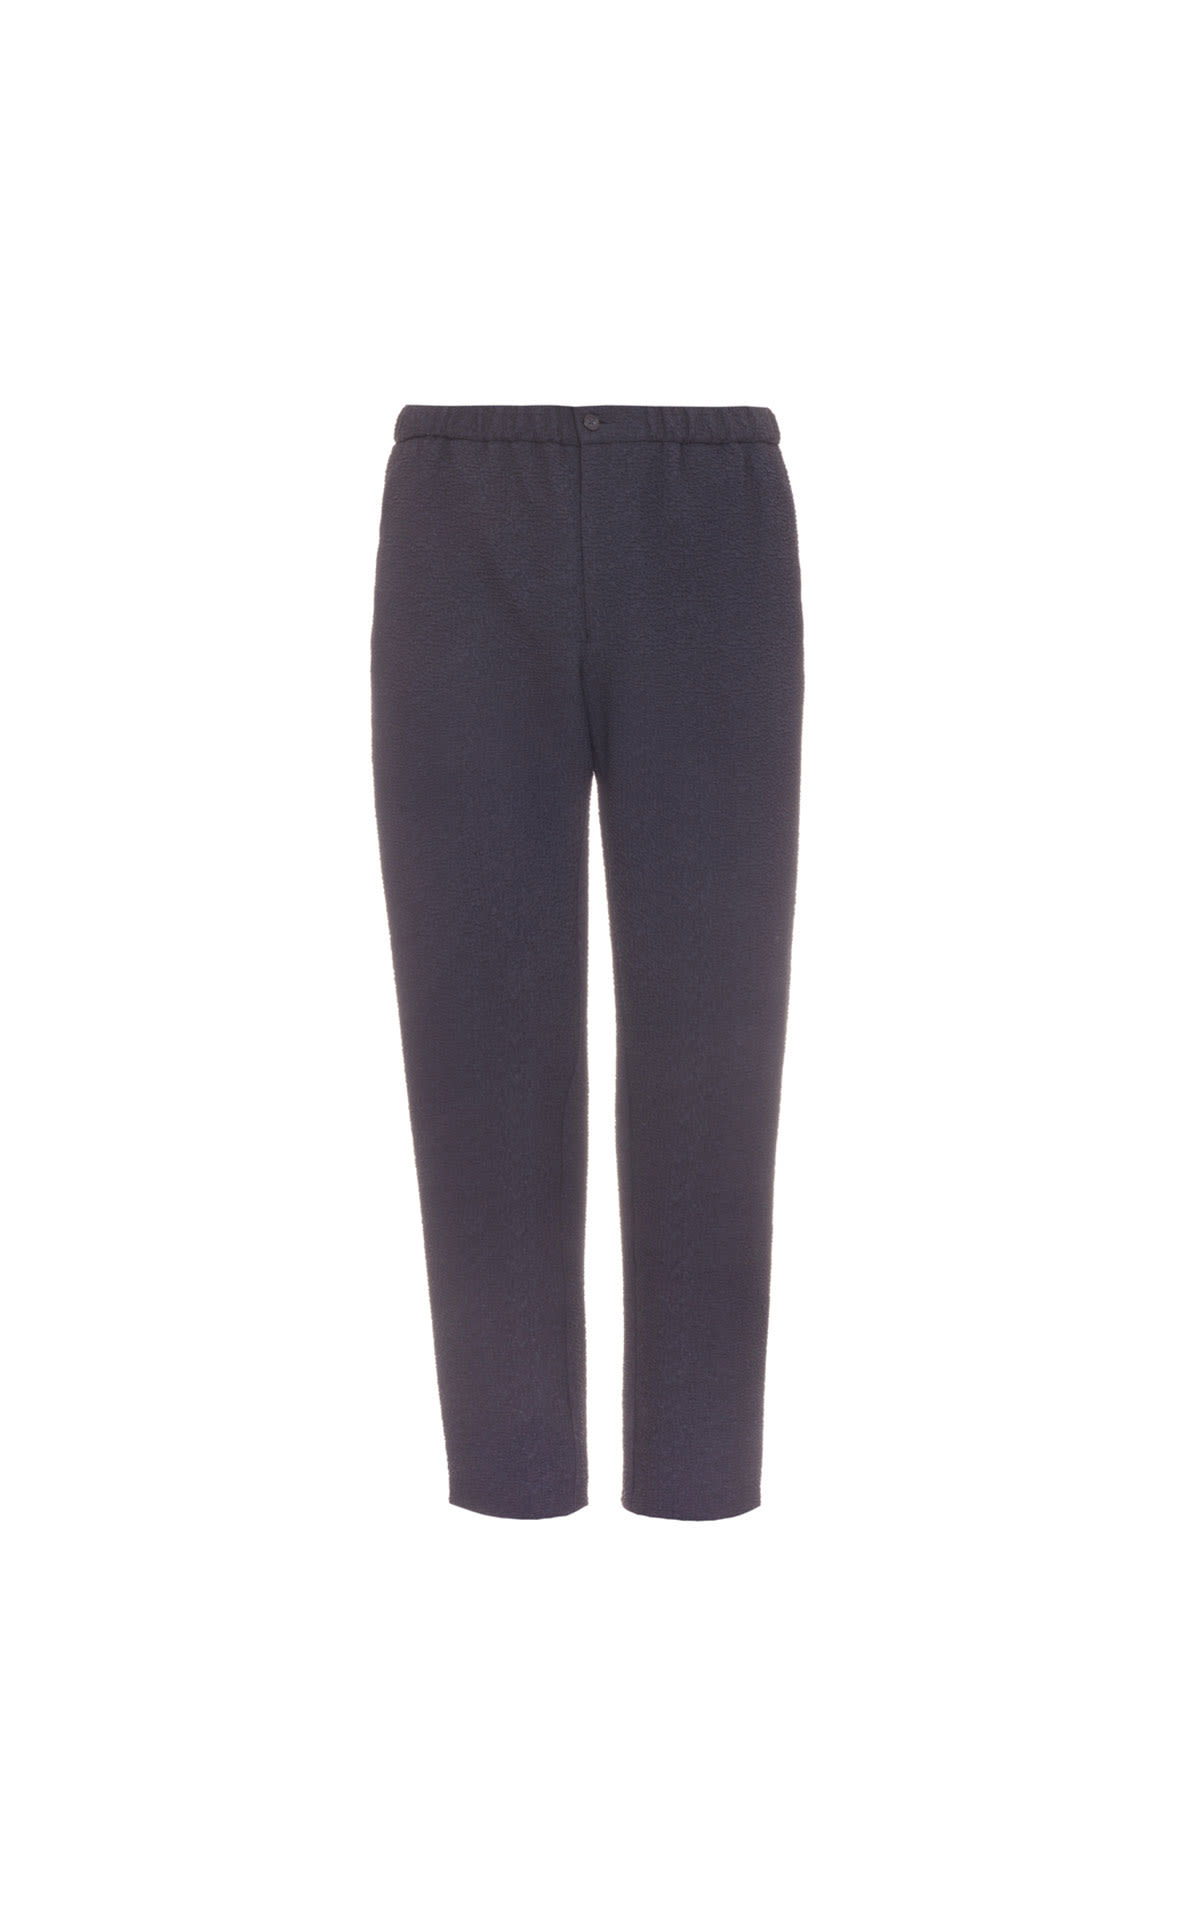 Armani Textured trouser from Bicester Village